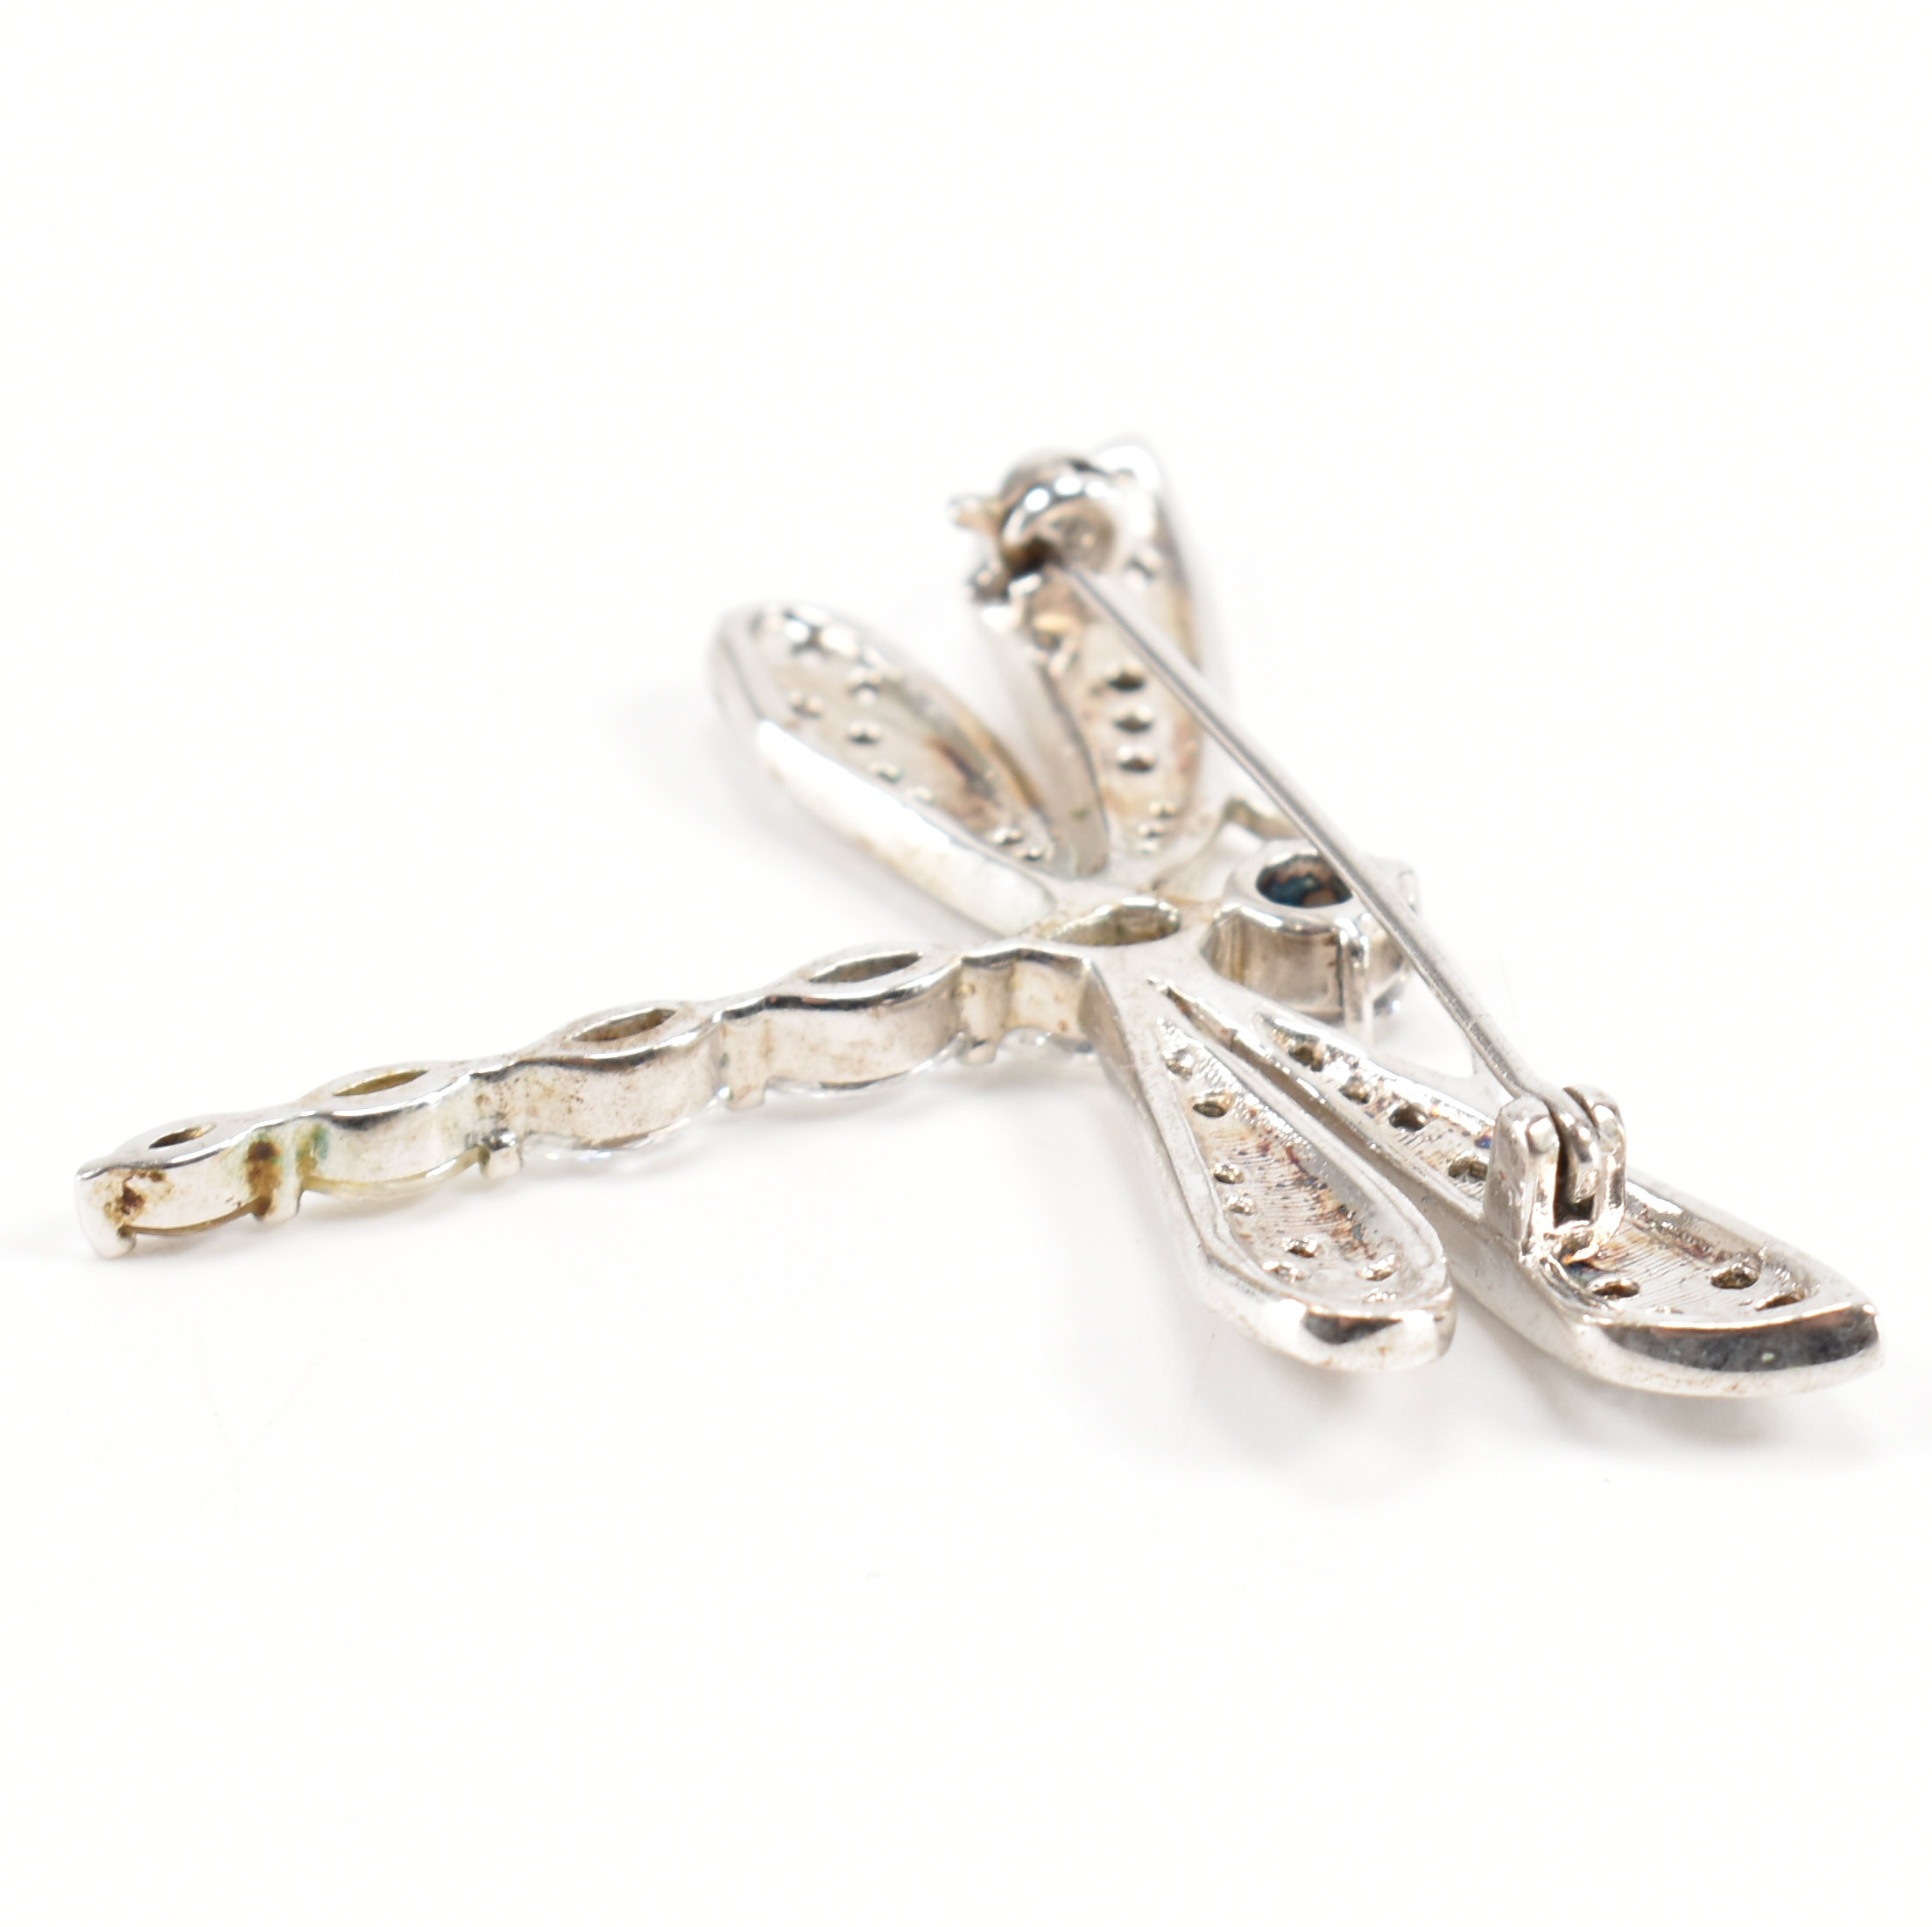 925 SILVER STONE SET DRAGONFLY BROOCH - Image 4 of 6